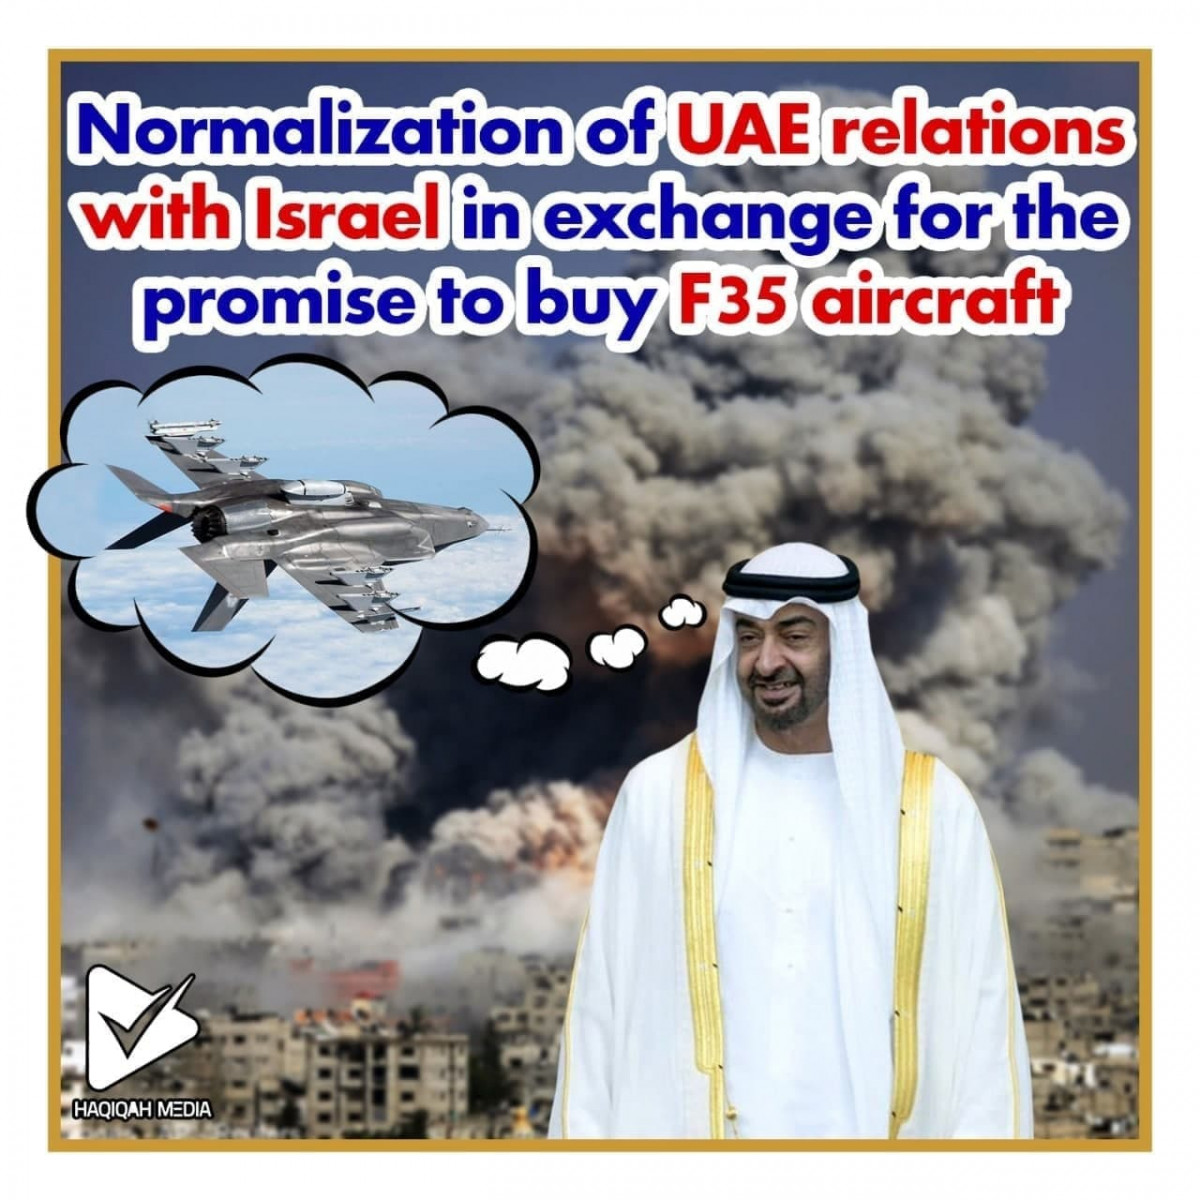 Normalization of UAE relations with lsrael in exchange for the promise to buy F35 aircraft